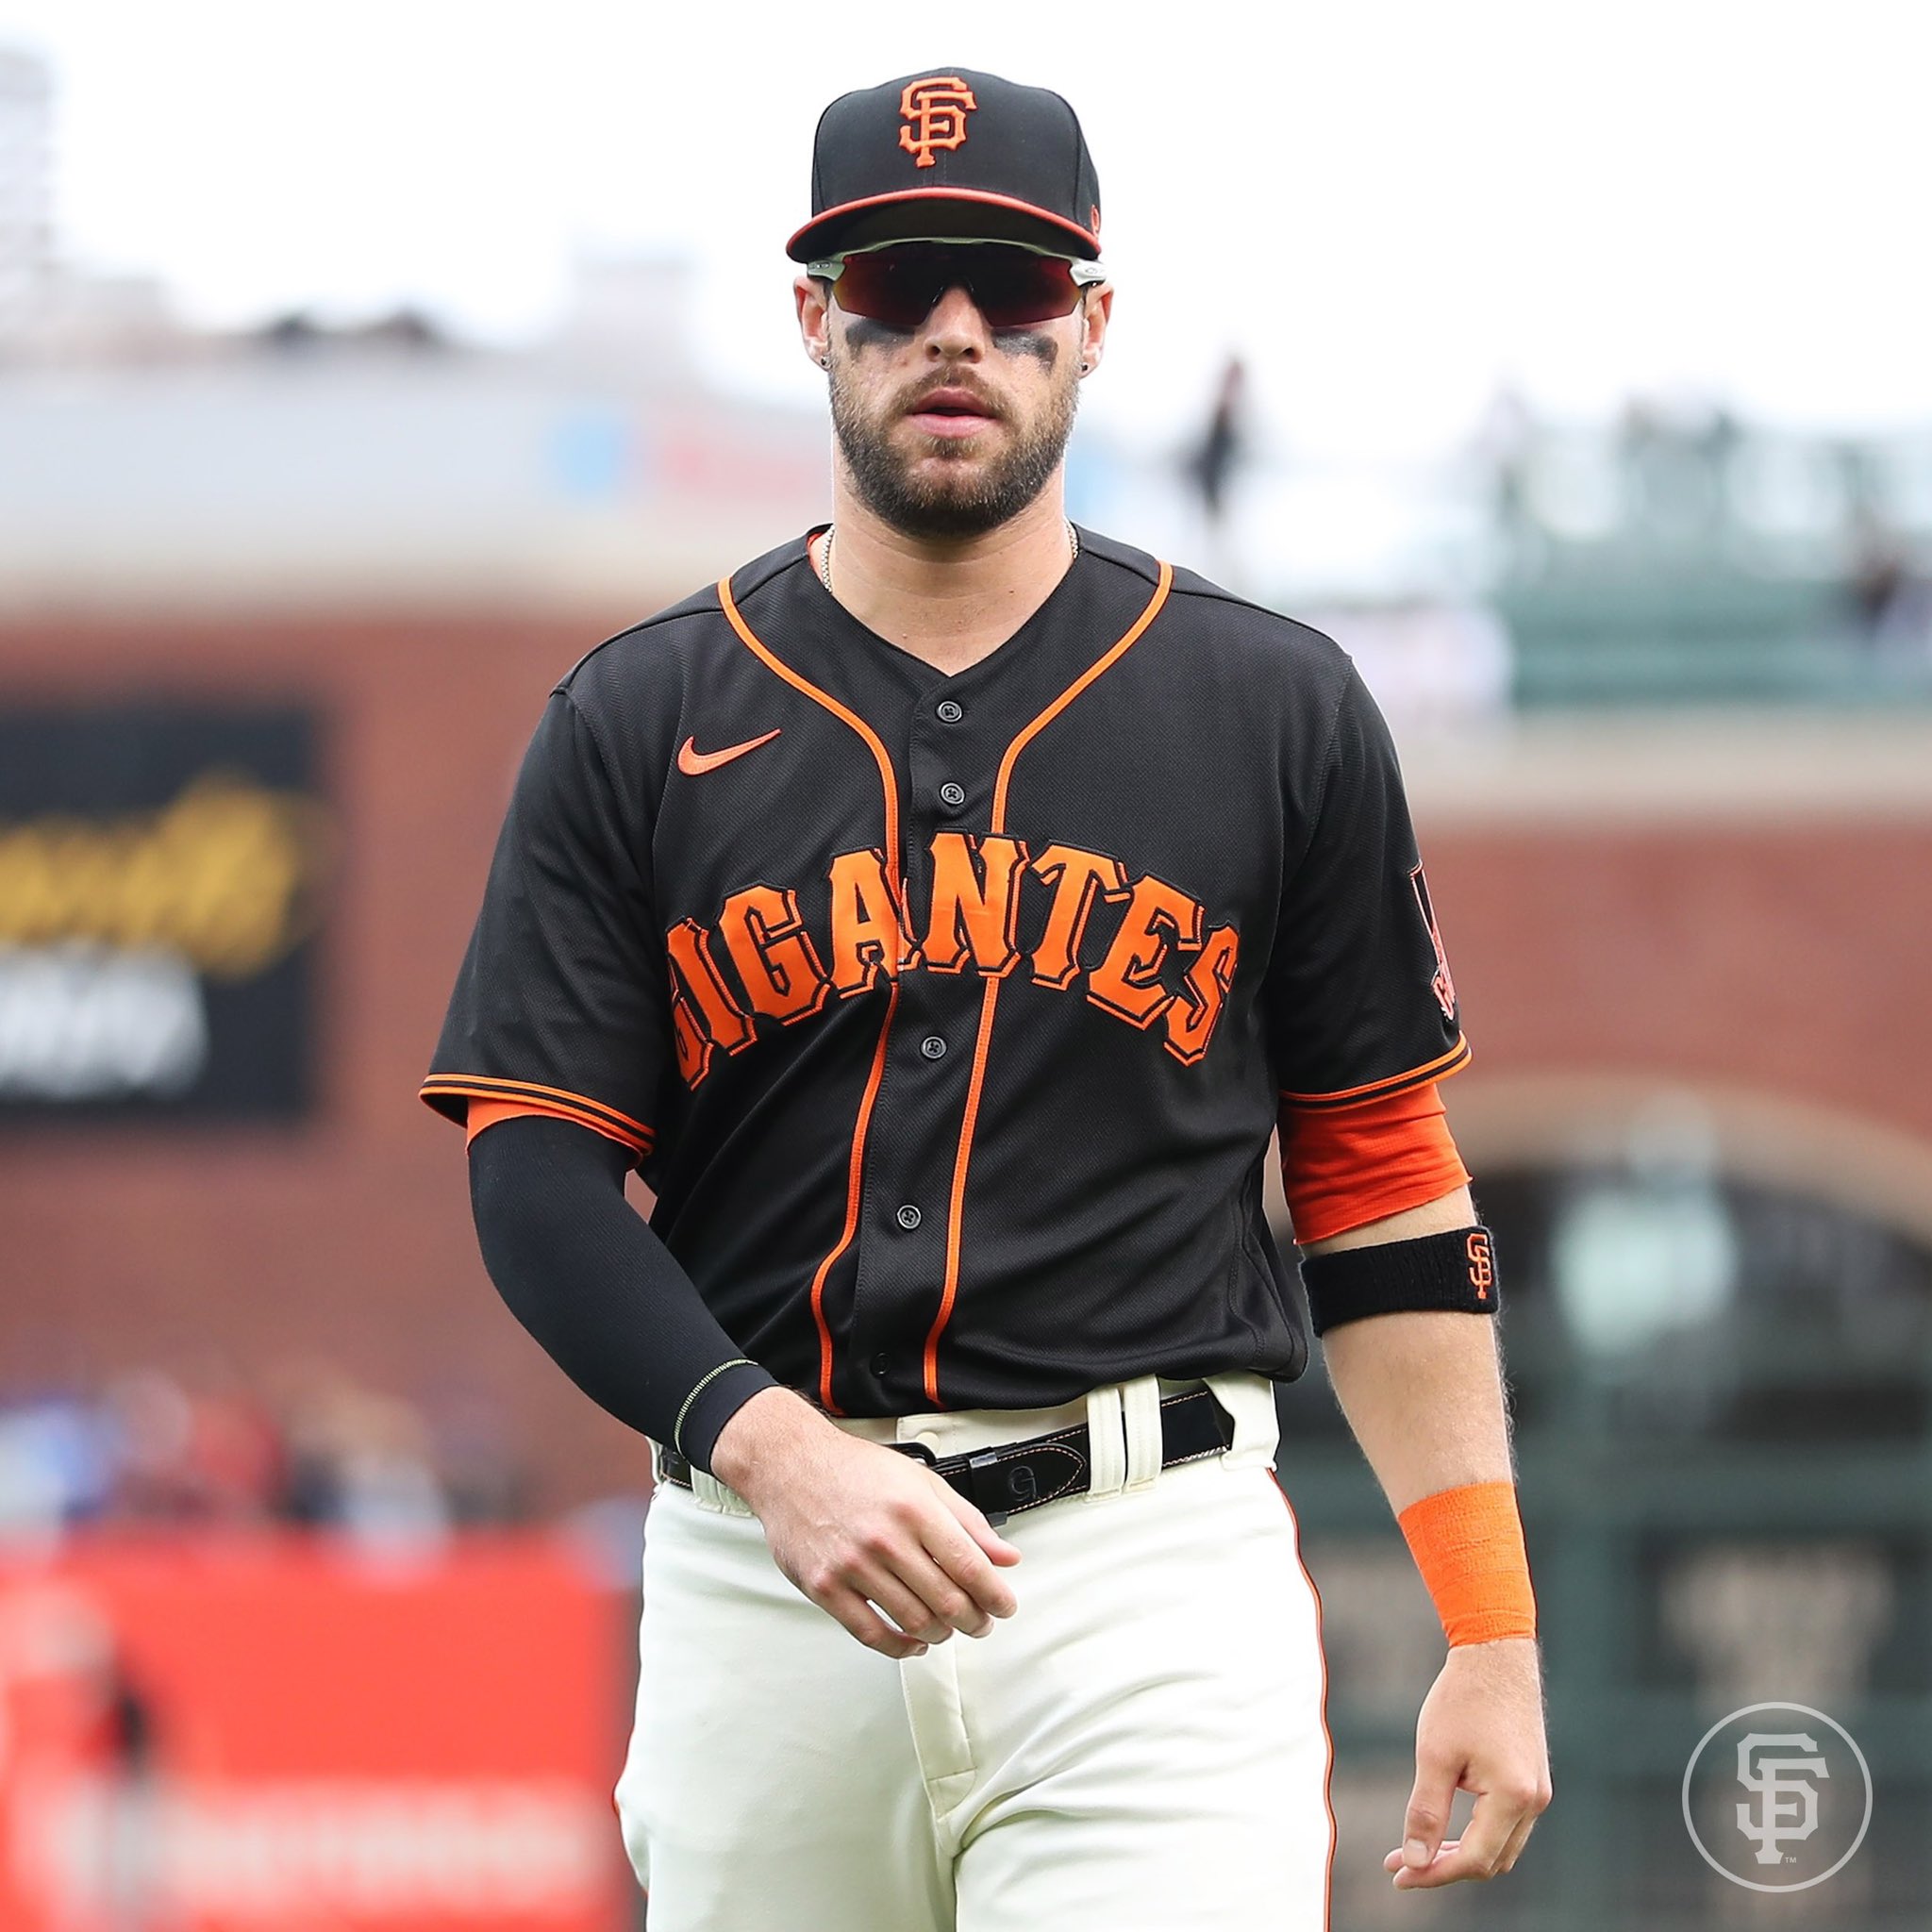 sf giants jersey outfit